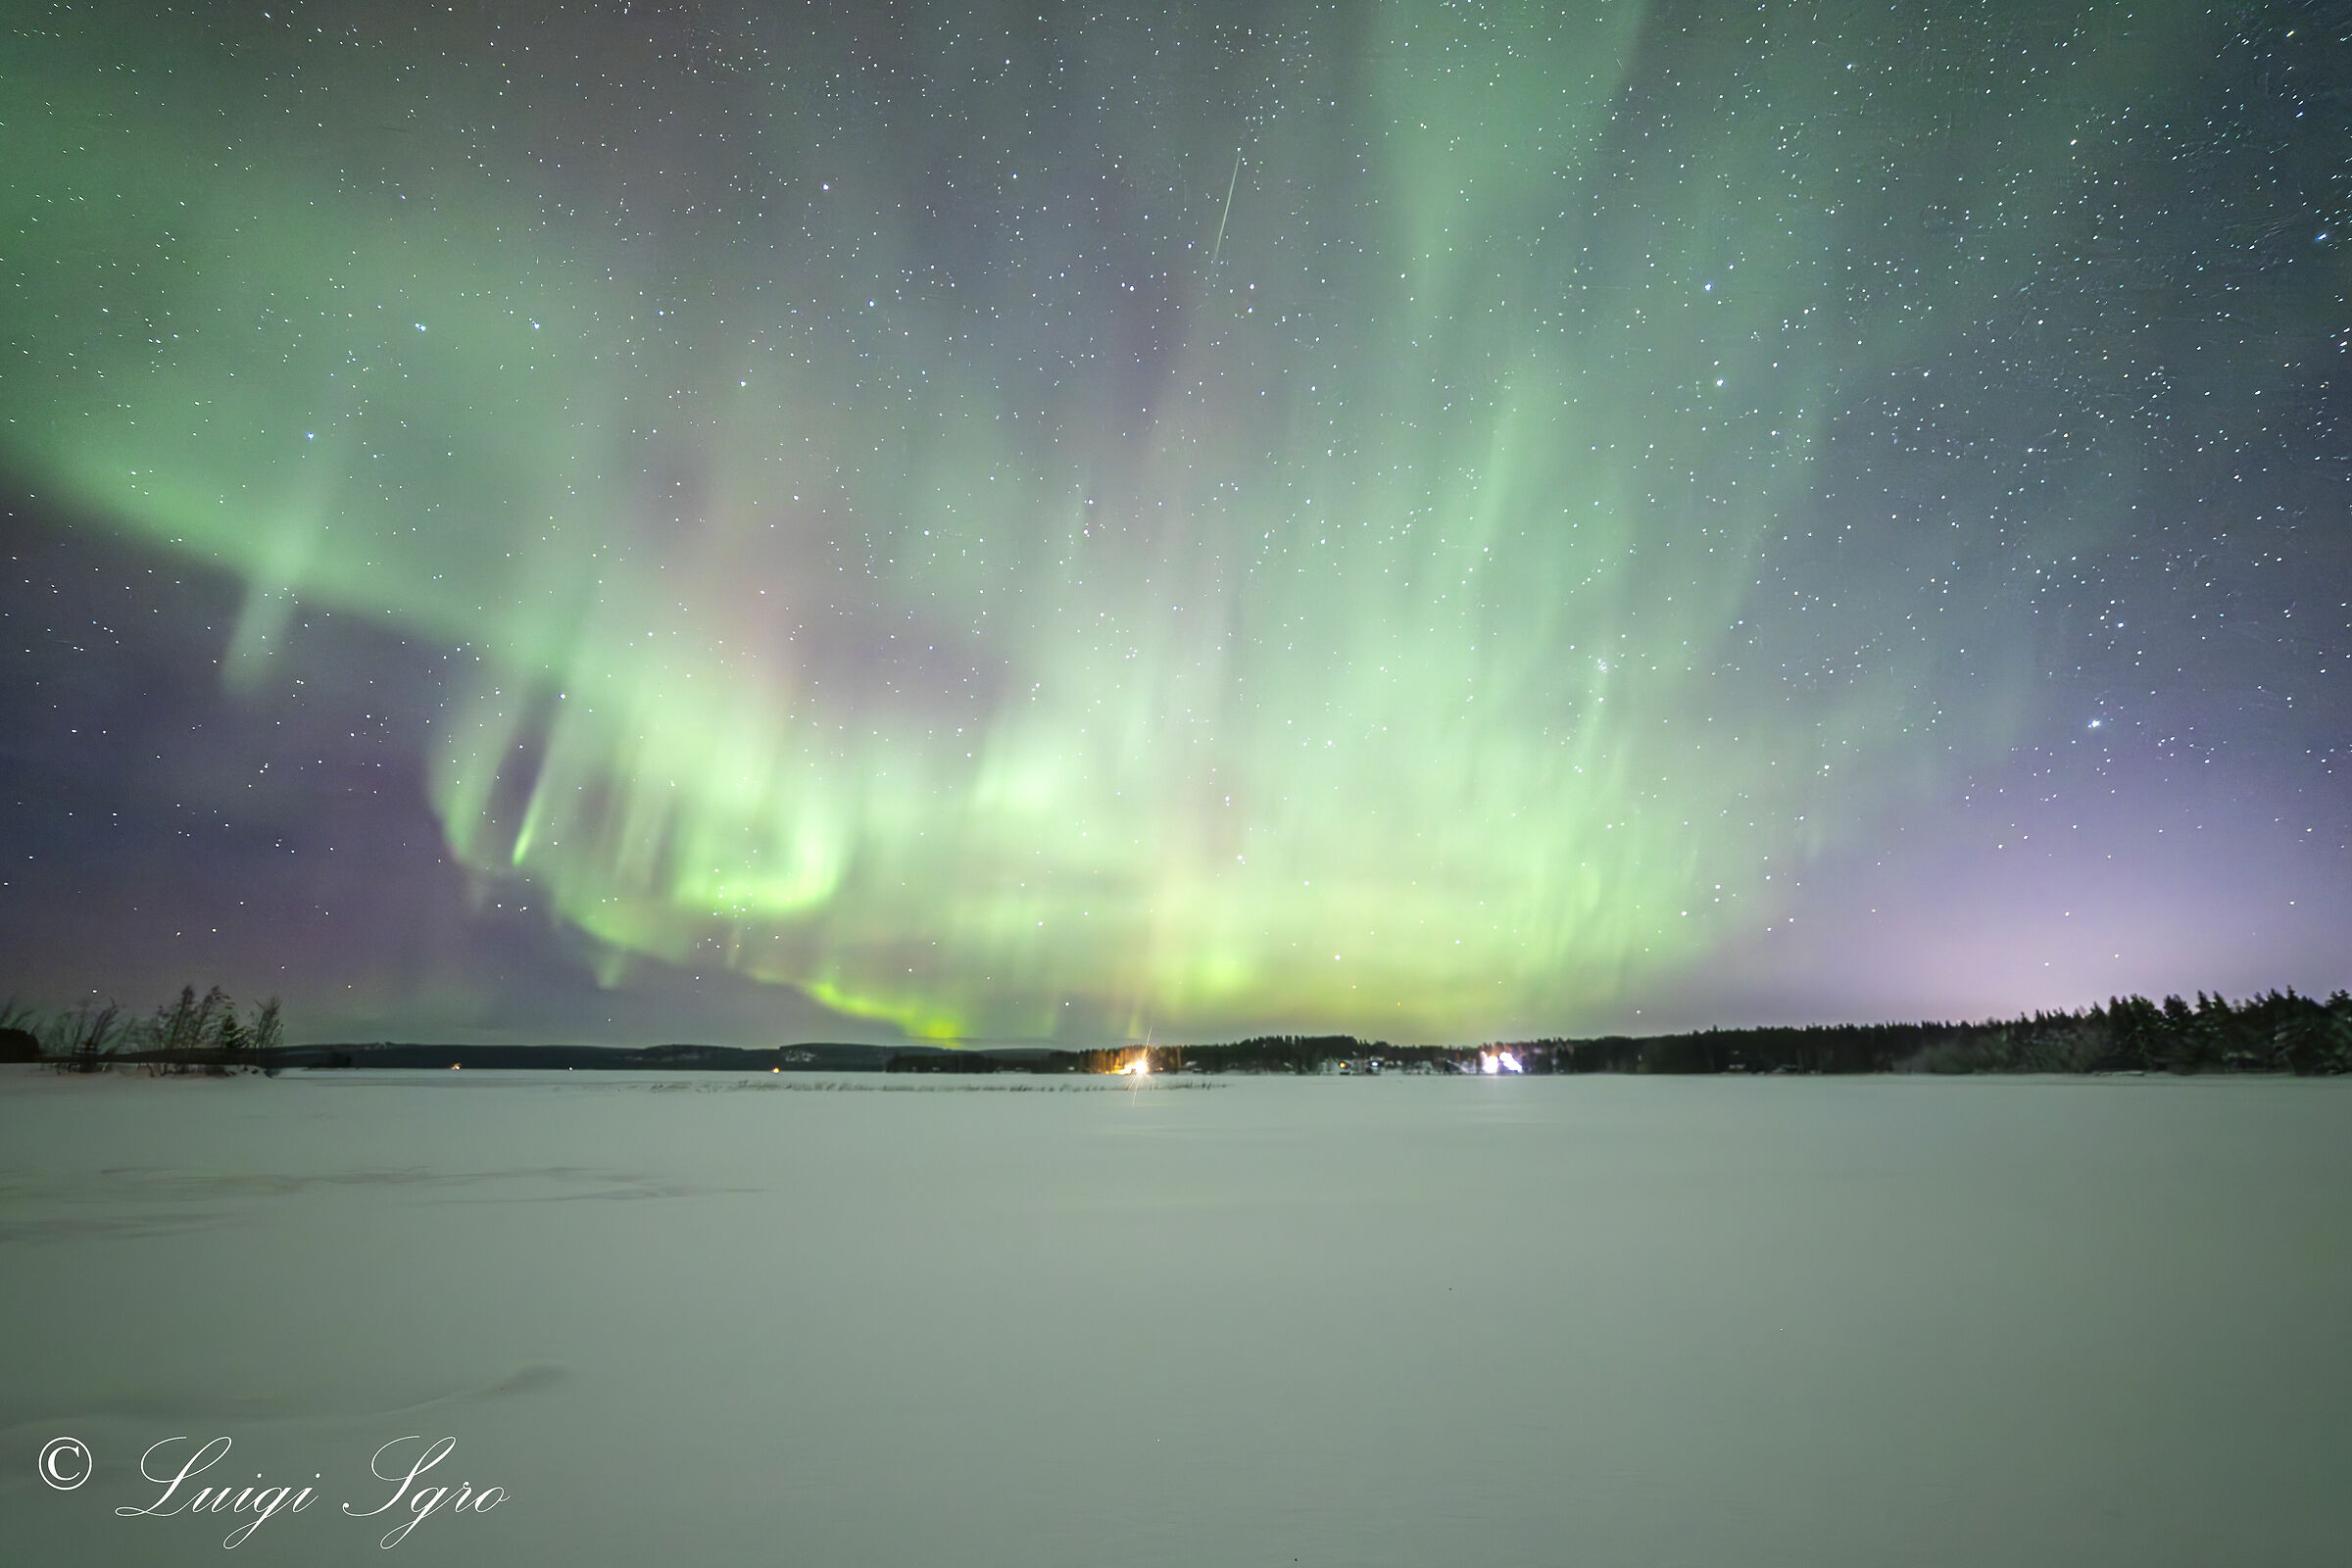 Bursts of lights in the Arctic sky ...